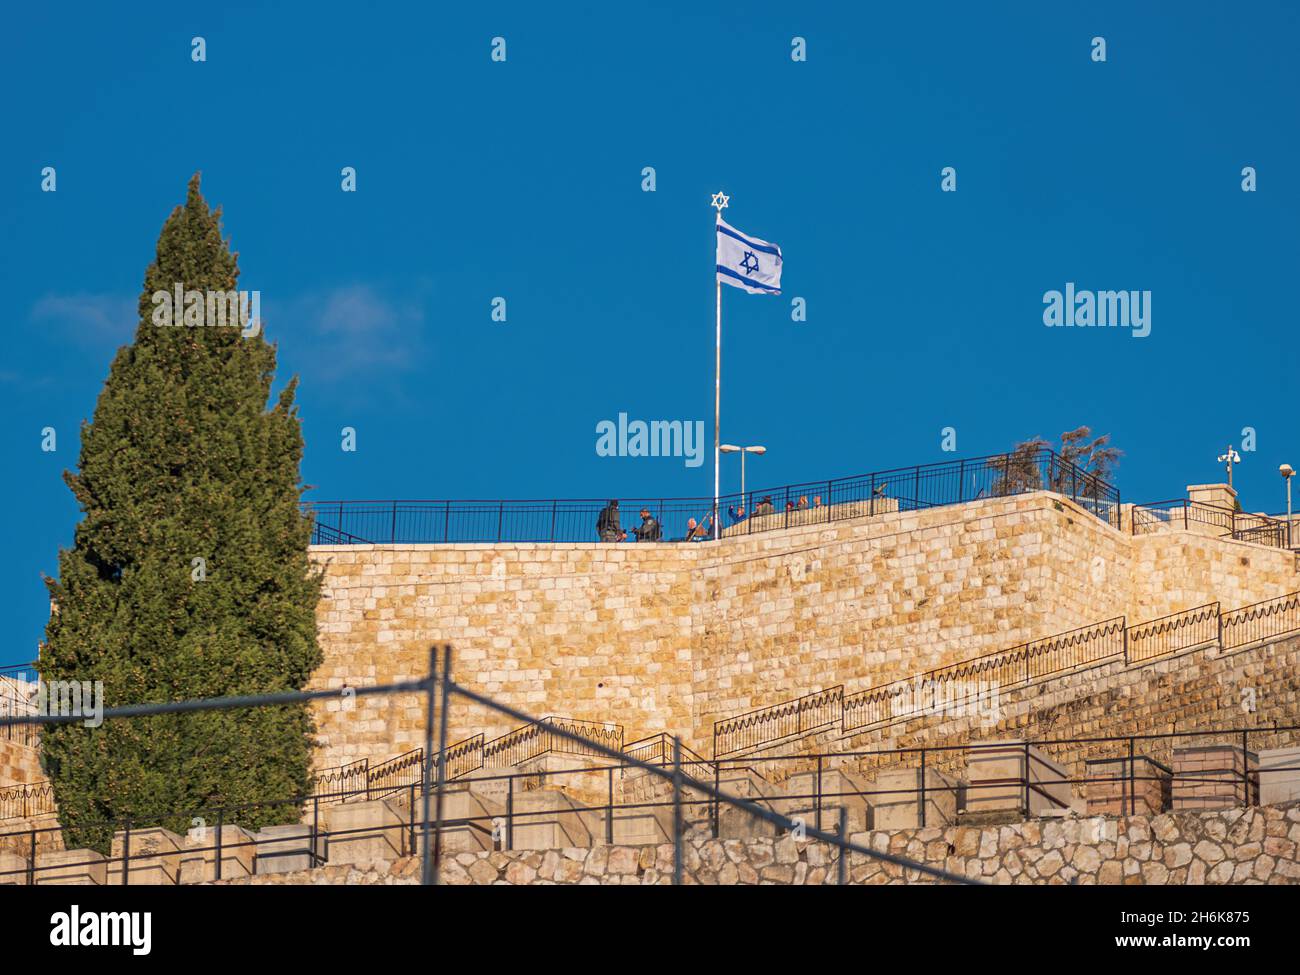 Israel, Jerusalem - January 13: Israeli national flag at Mount of Olives view point on January 13, 2020 in Jerusalem, Israel. Every inch of Jerusalem Stock Photo